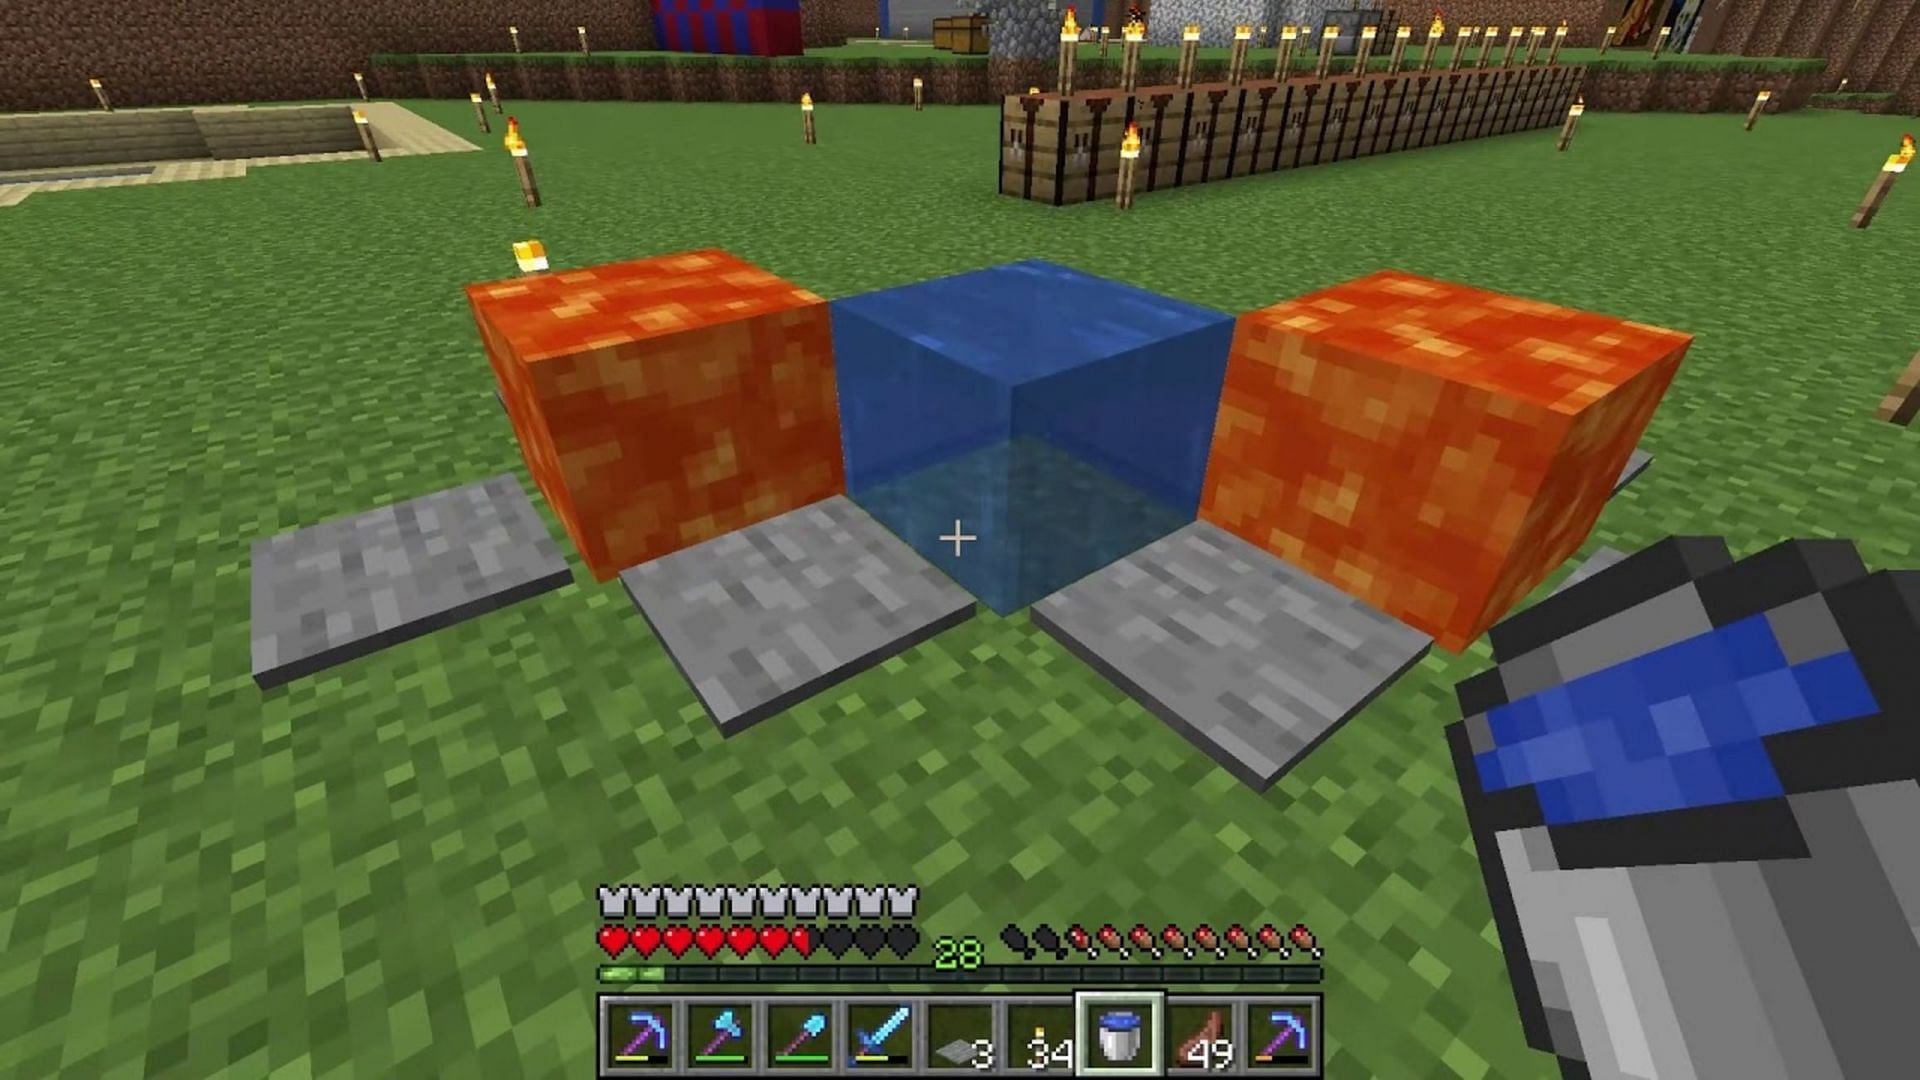 Pressure plates can stop water and lava flows immediately (Image via Waifu Simulator 27/YouTube)